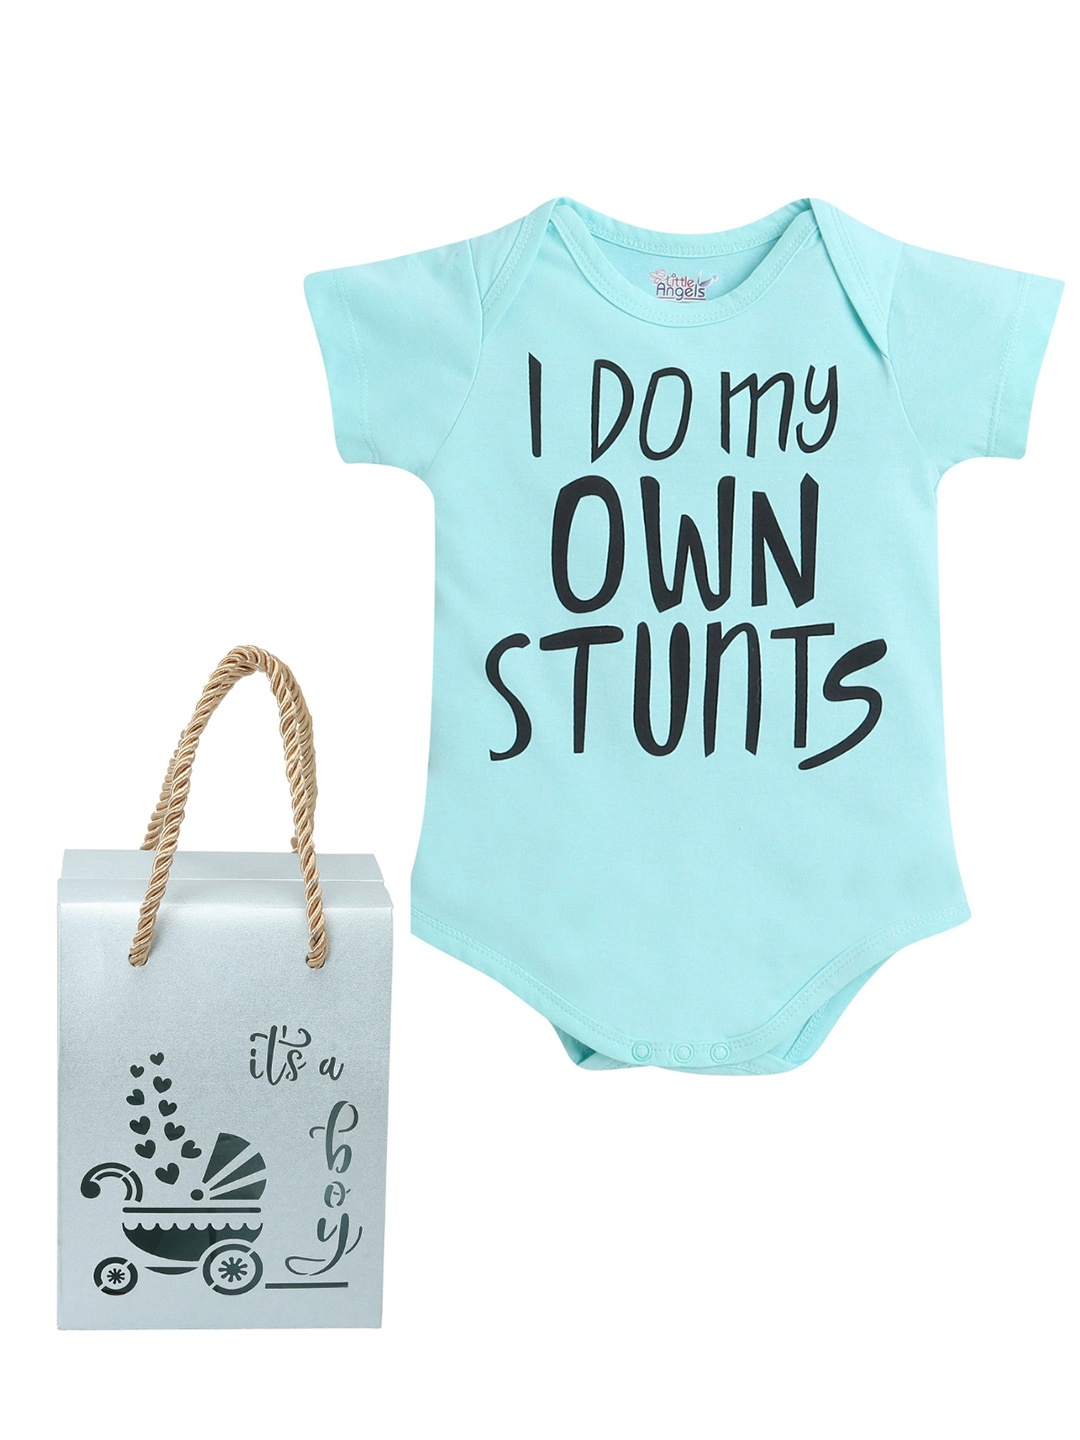 

Little Angels Infant Boys Printed Baby Apparel Gift Set, Turquoise blue